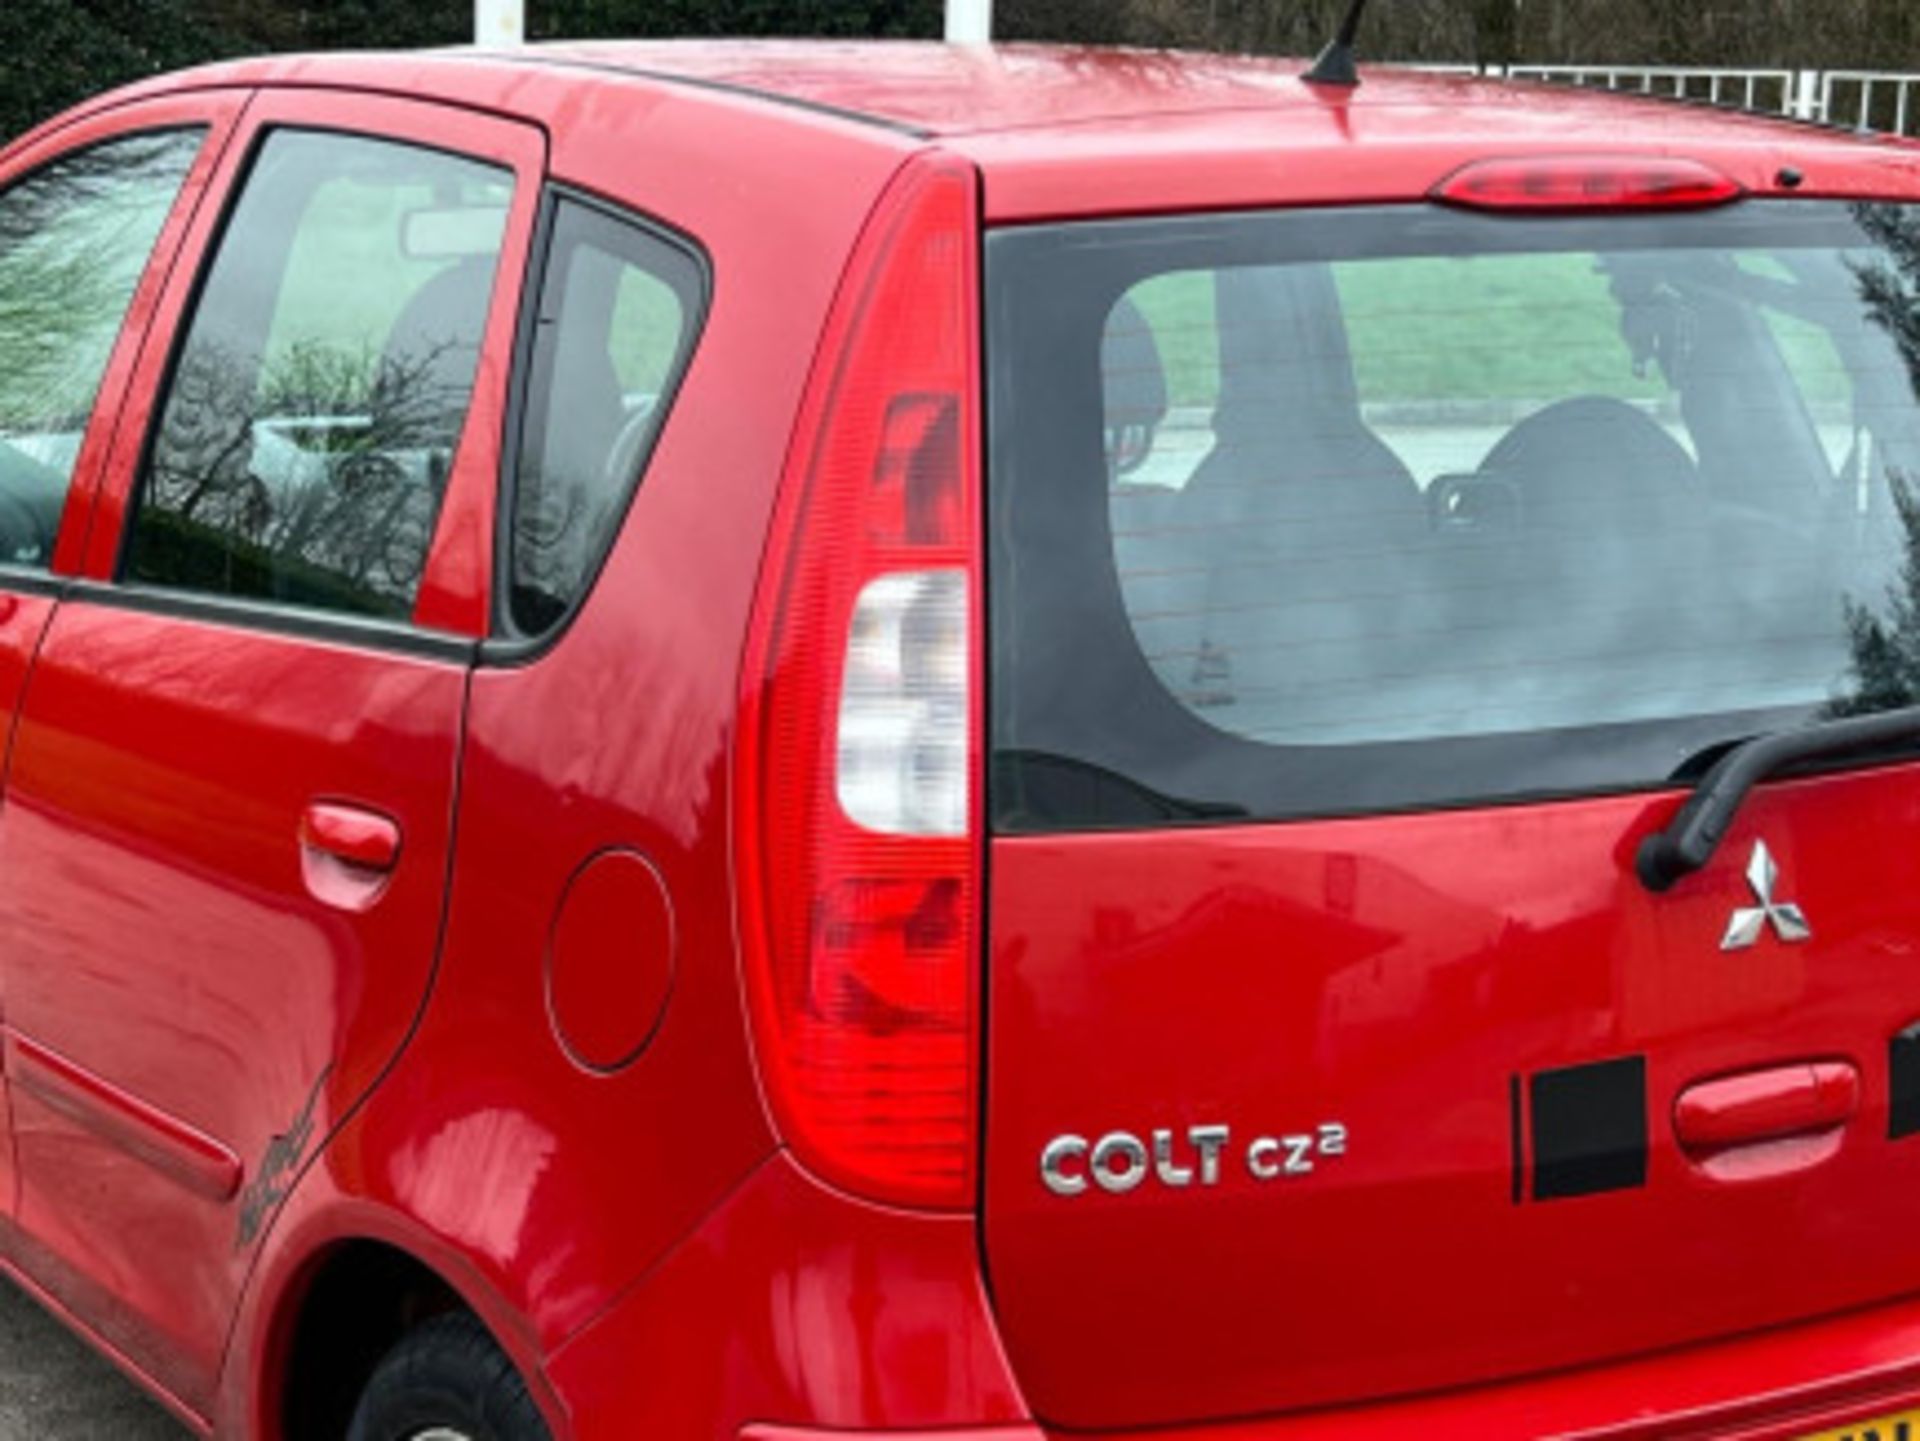 2007 MITSUBISHI COLT 1.5 DI-D DIESEL AUTOMATIC >>--NO VAT ON HAMMER--<< - Image 71 of 191